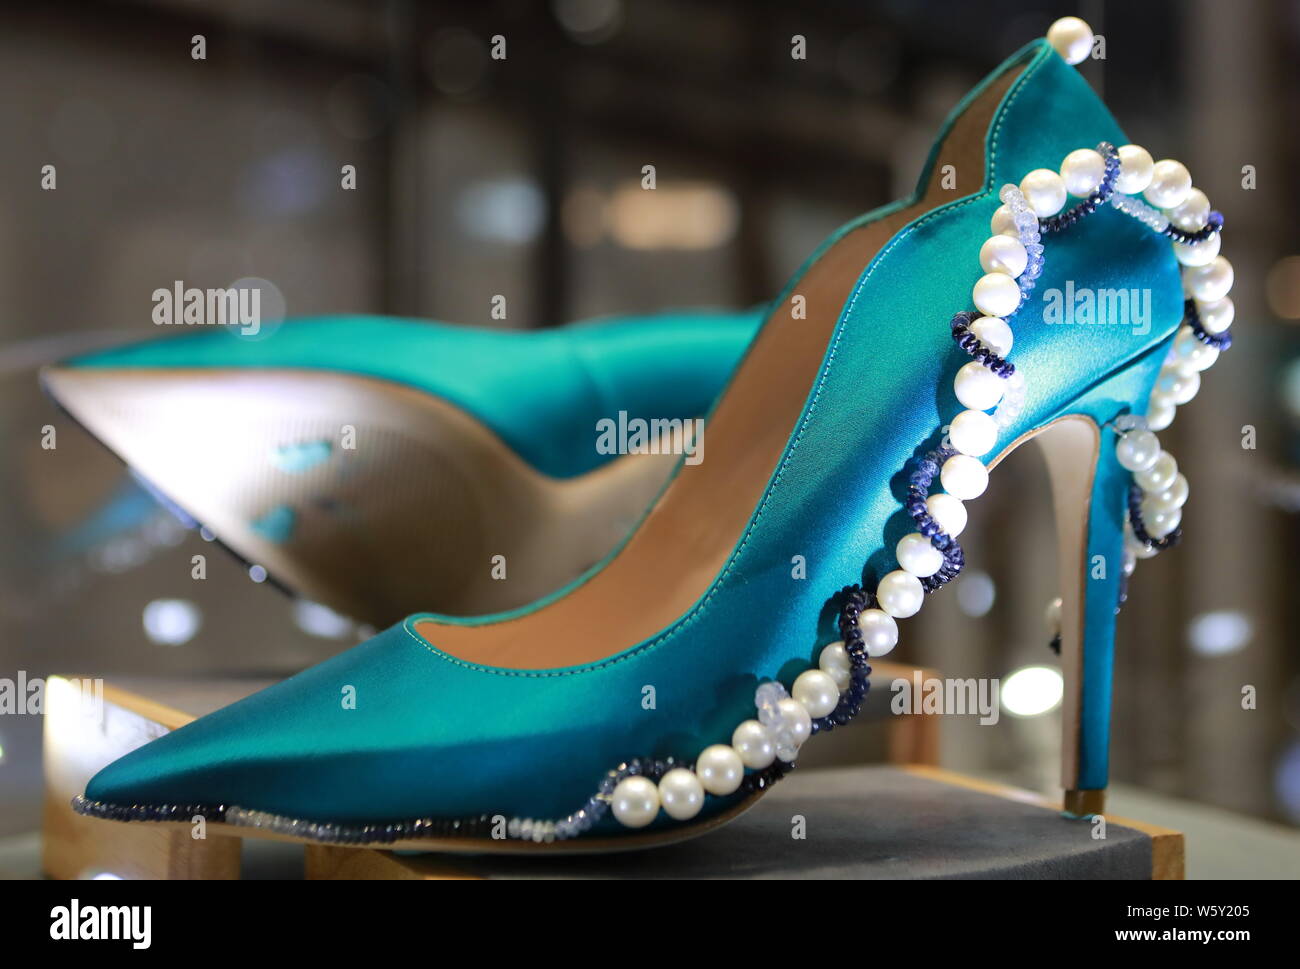 Top 10 most expensive shoes in the world | LUXHABITAT